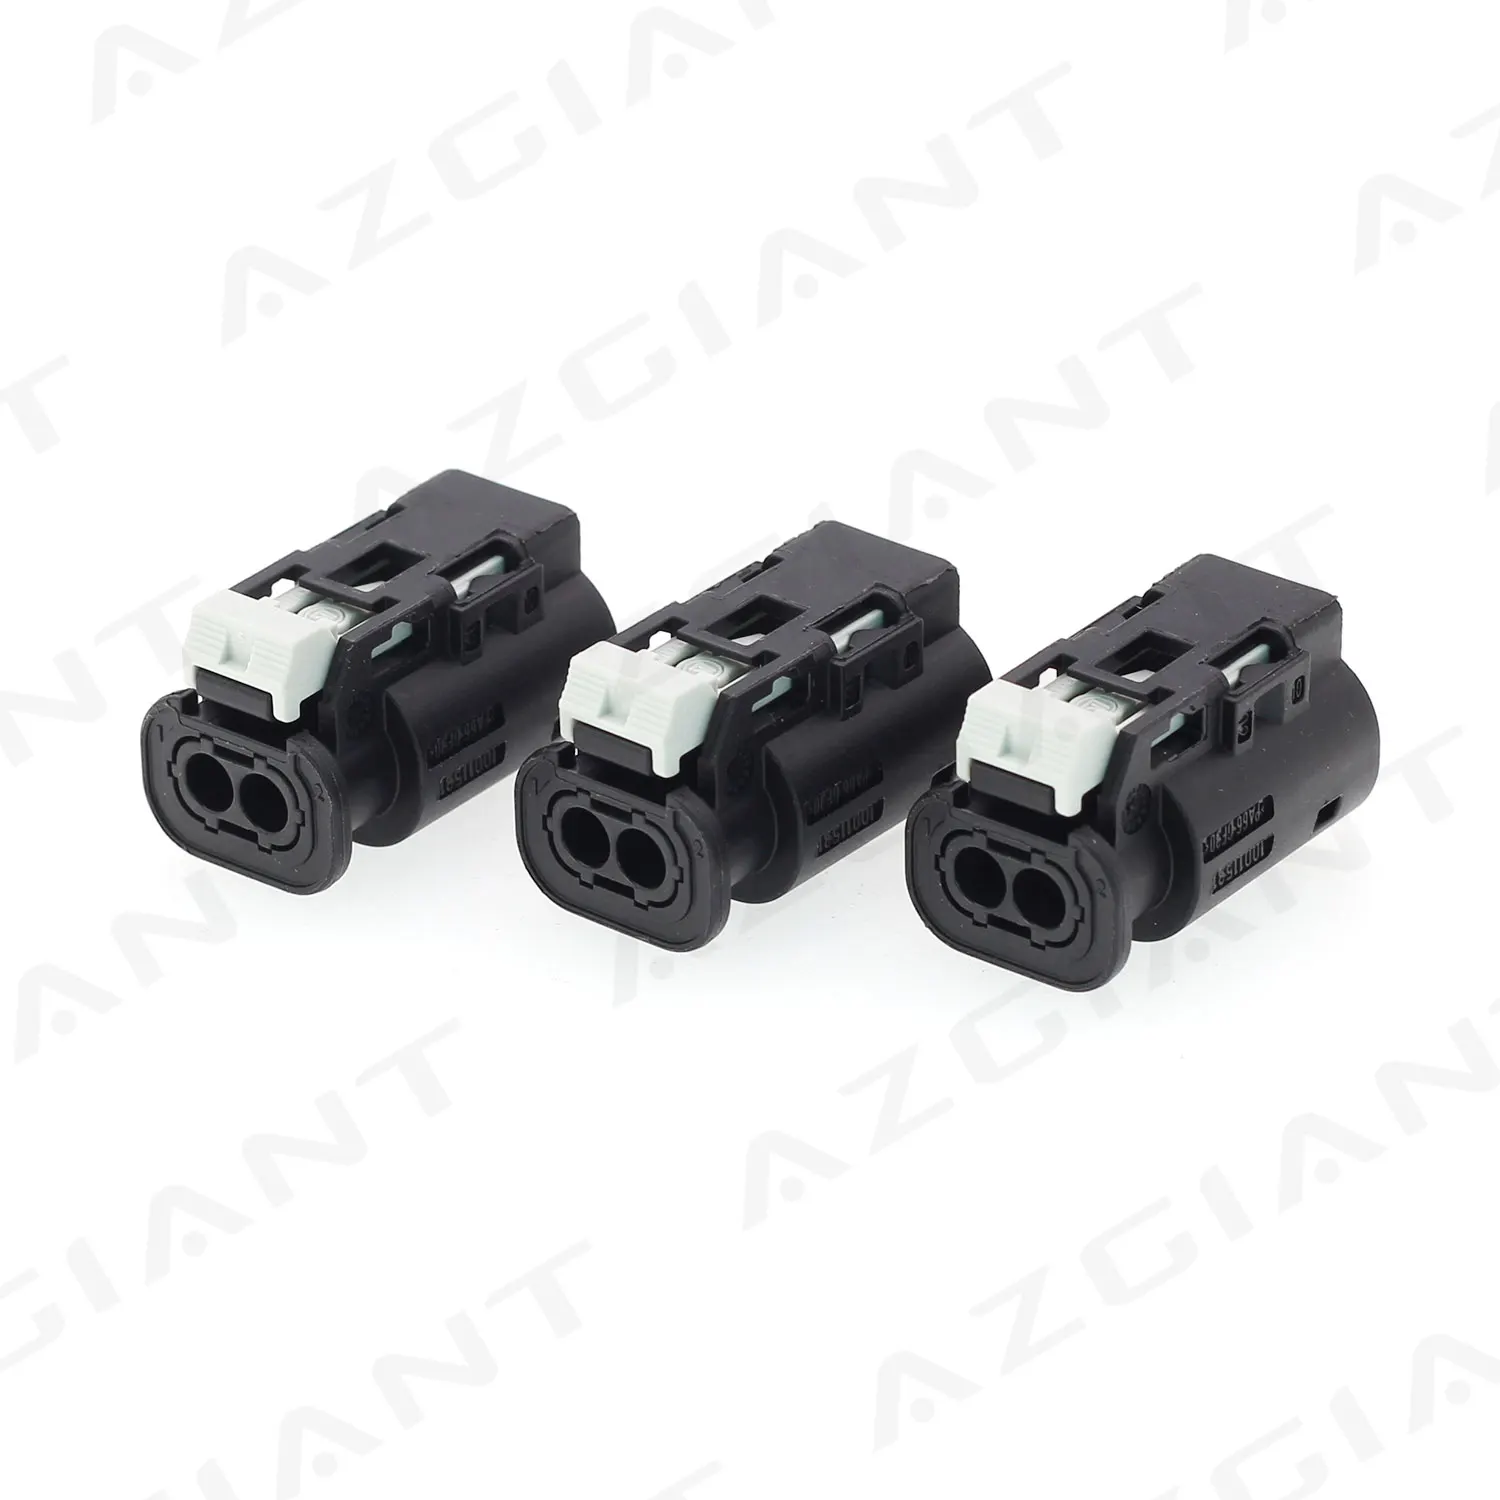 

3pcs original for KOSTAL 2pin Ignition coil harness damper plug 10010337 Waterproof Auto connector 9441291